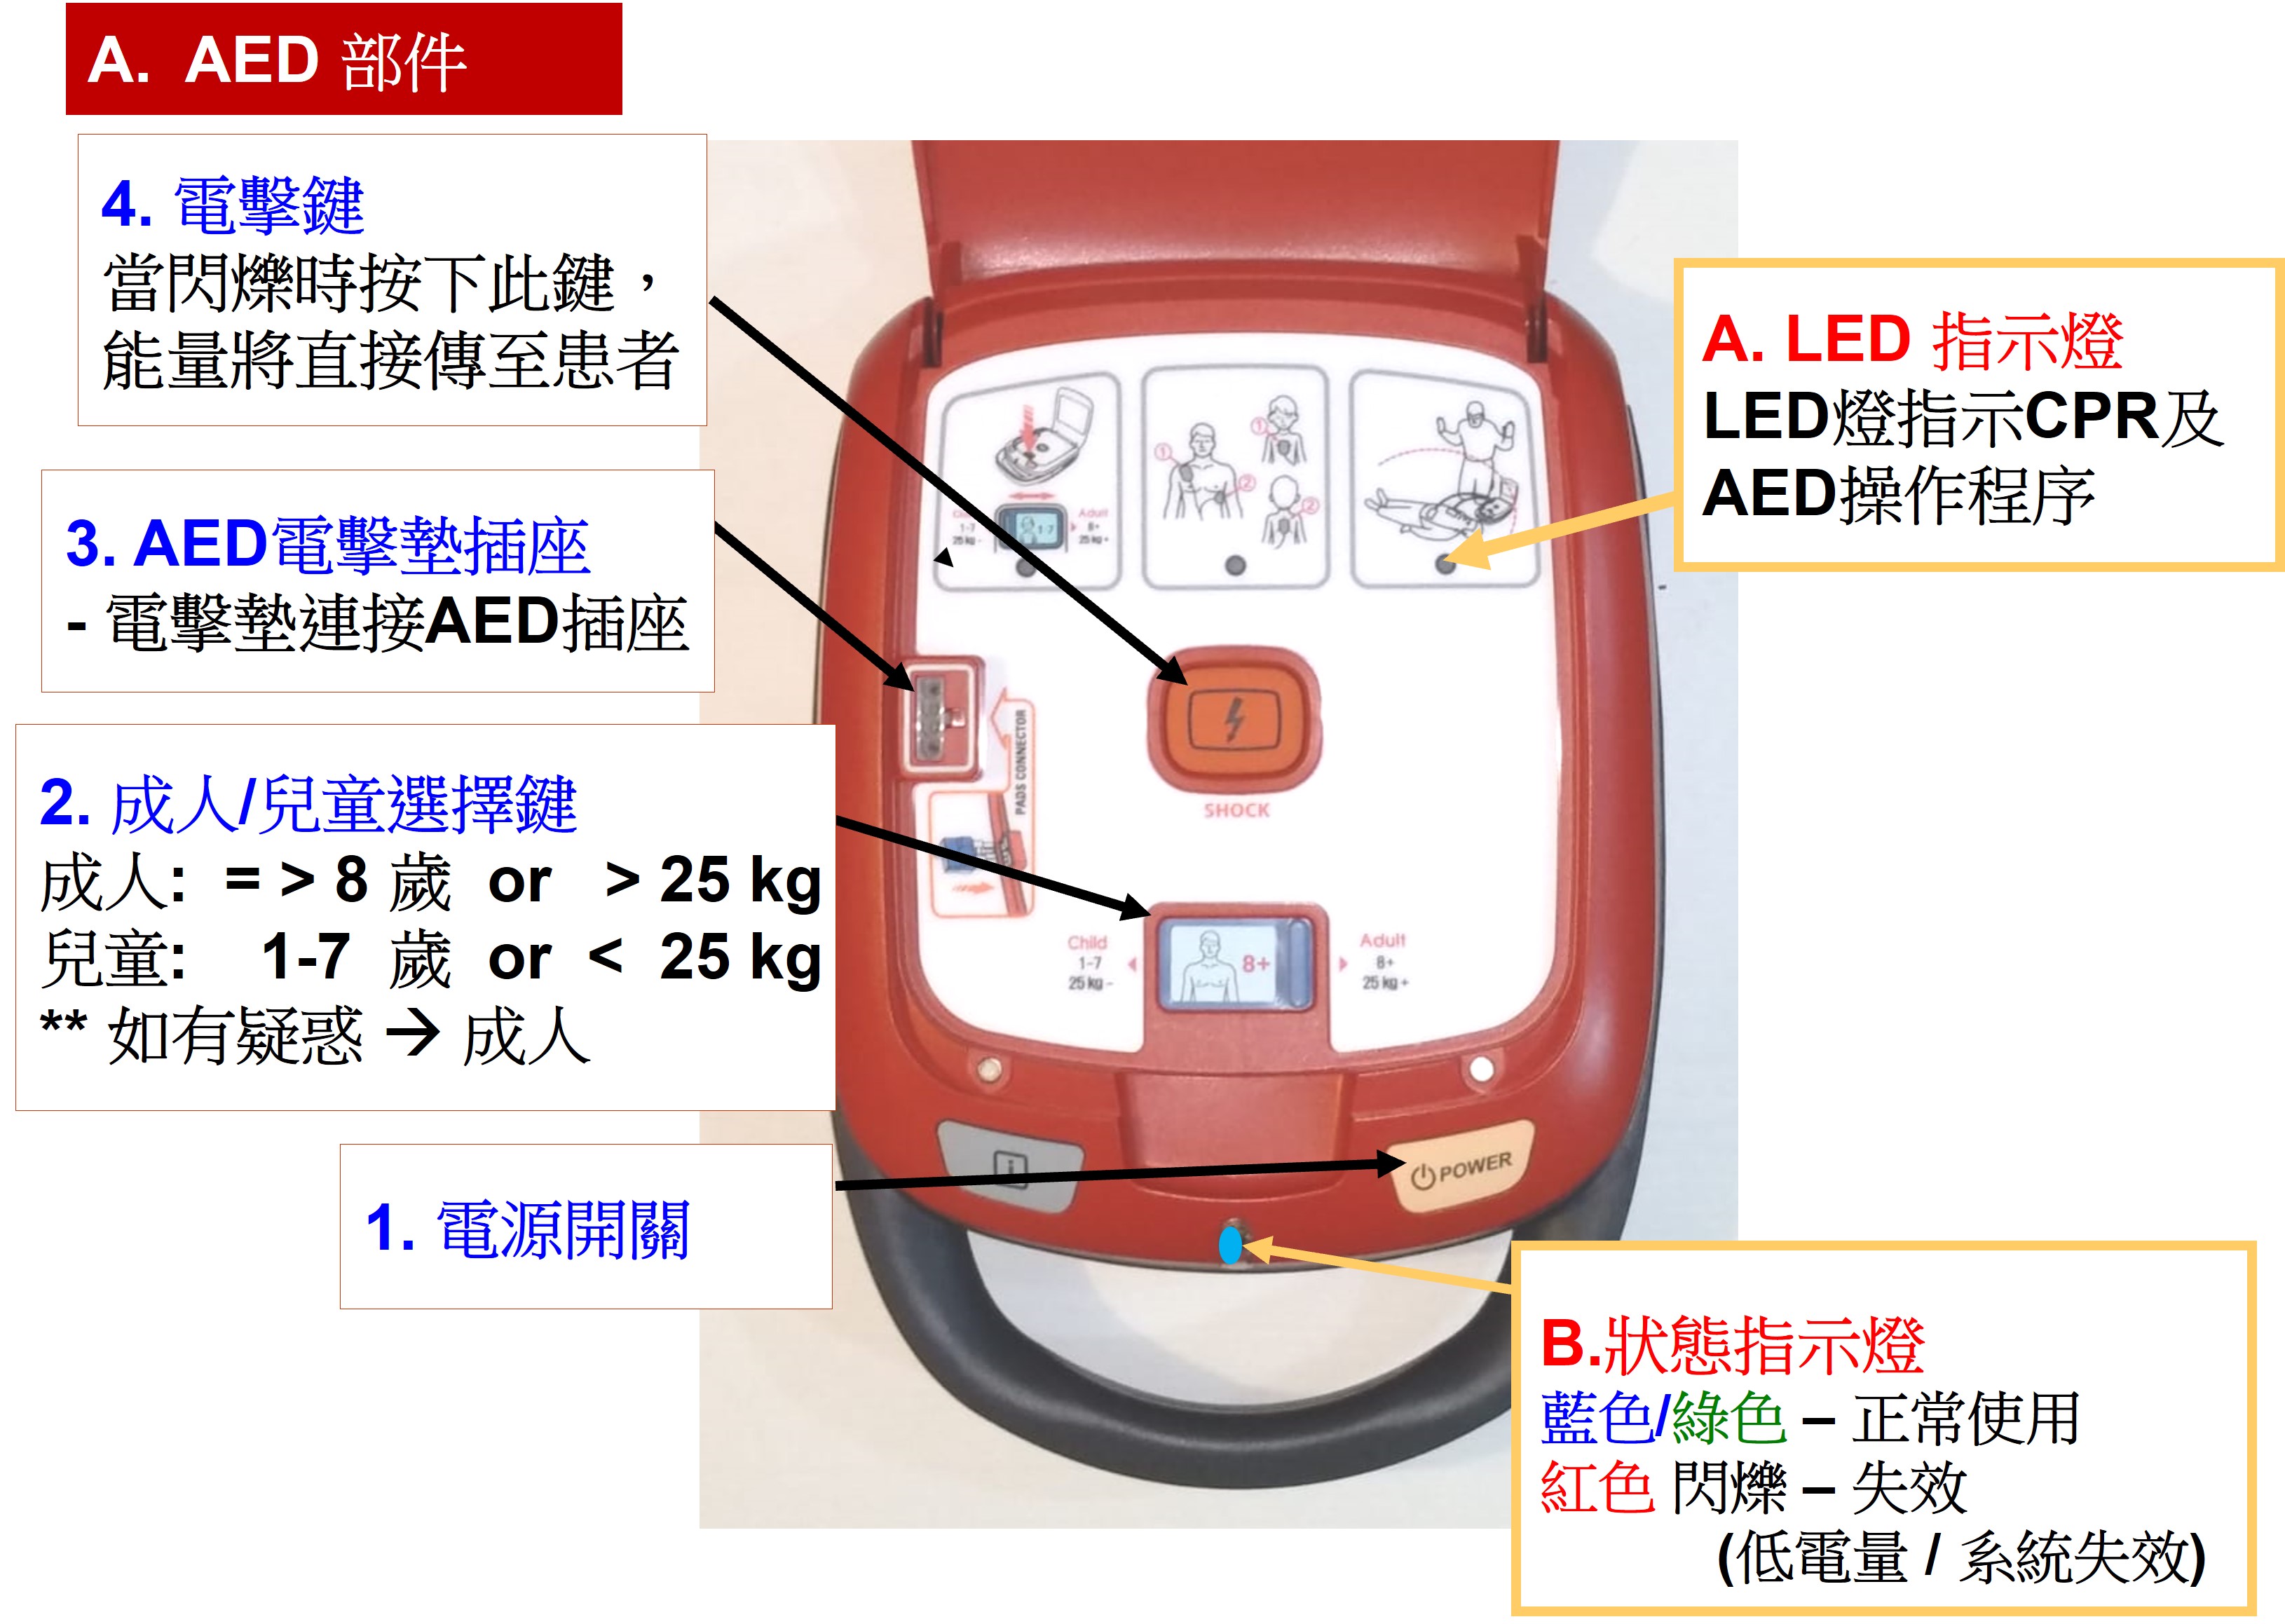 AED operation steps